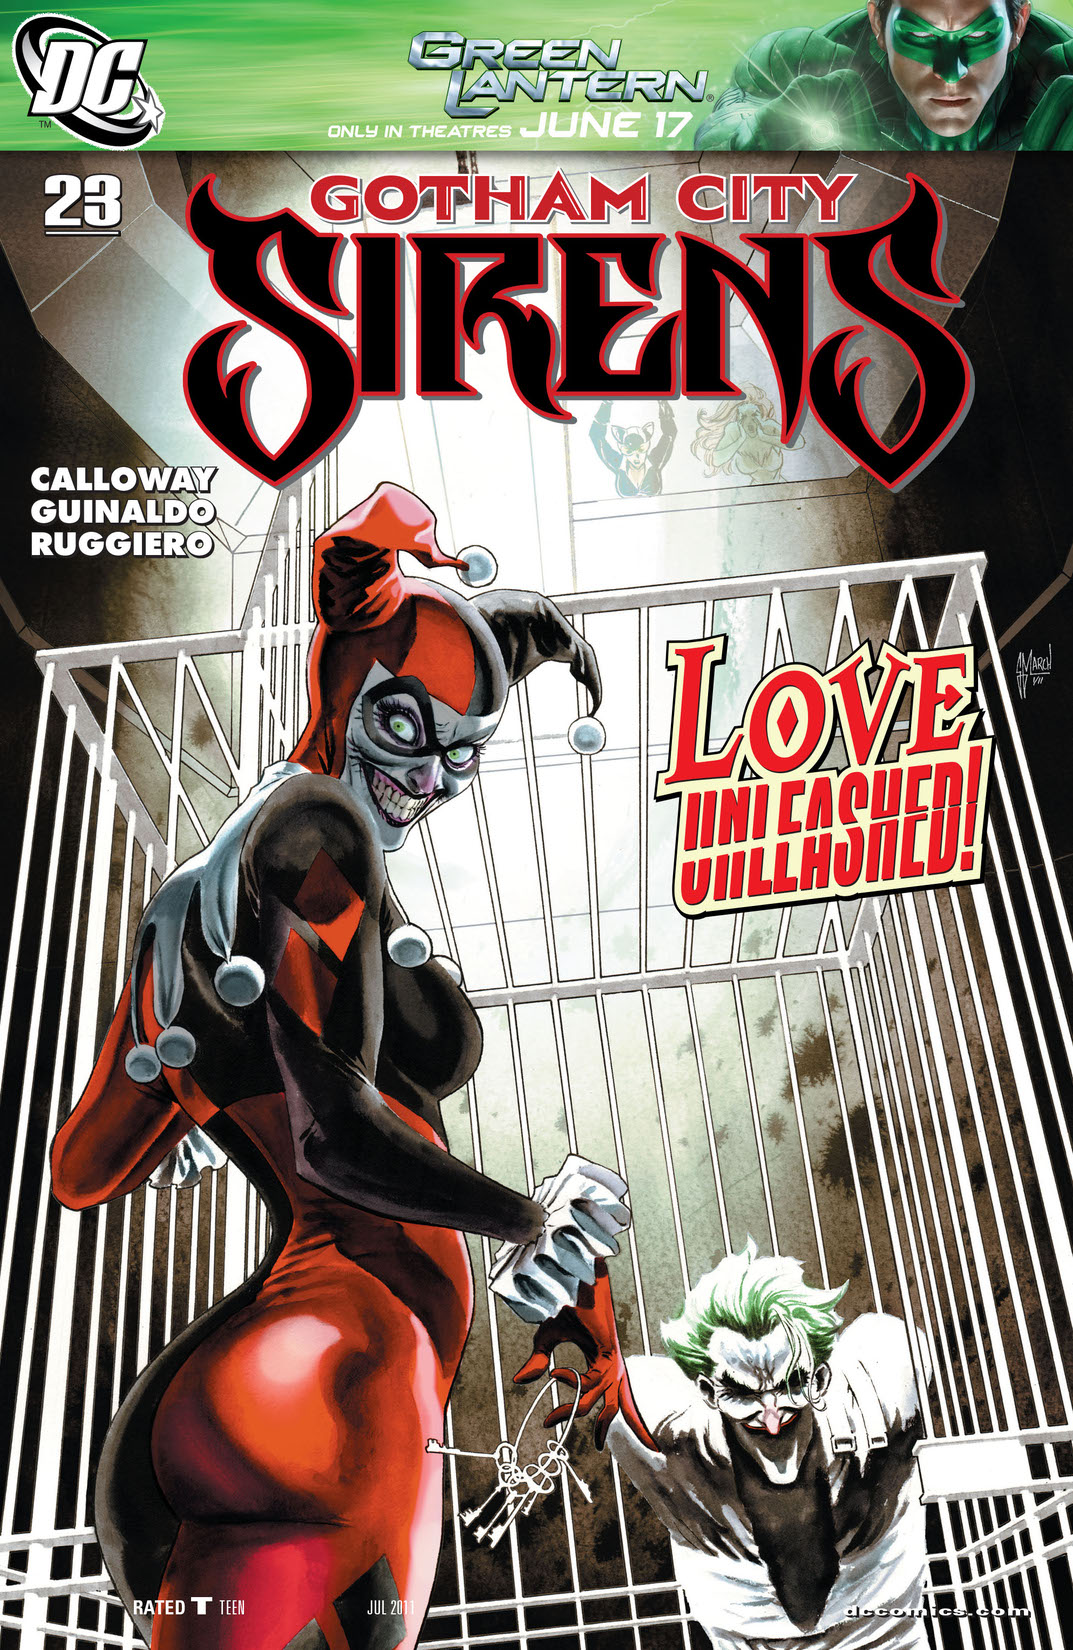 Gotham City Sirens #23 preview images